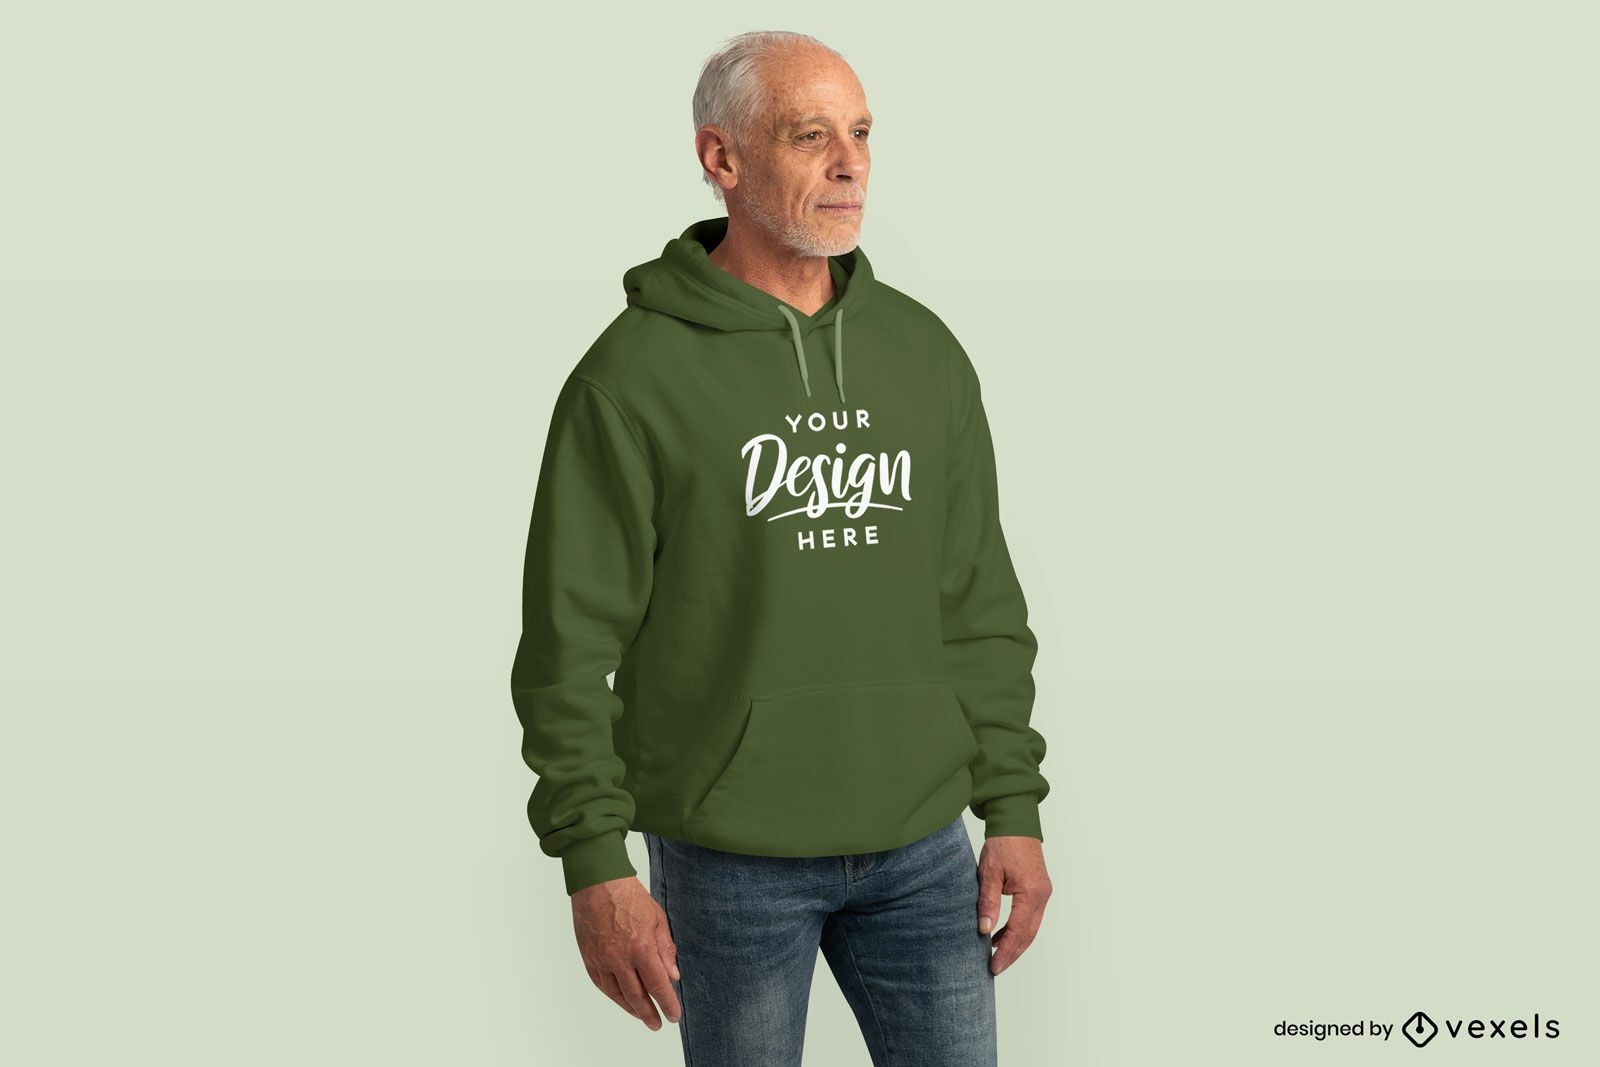 Adult white man with green hoodie mockup